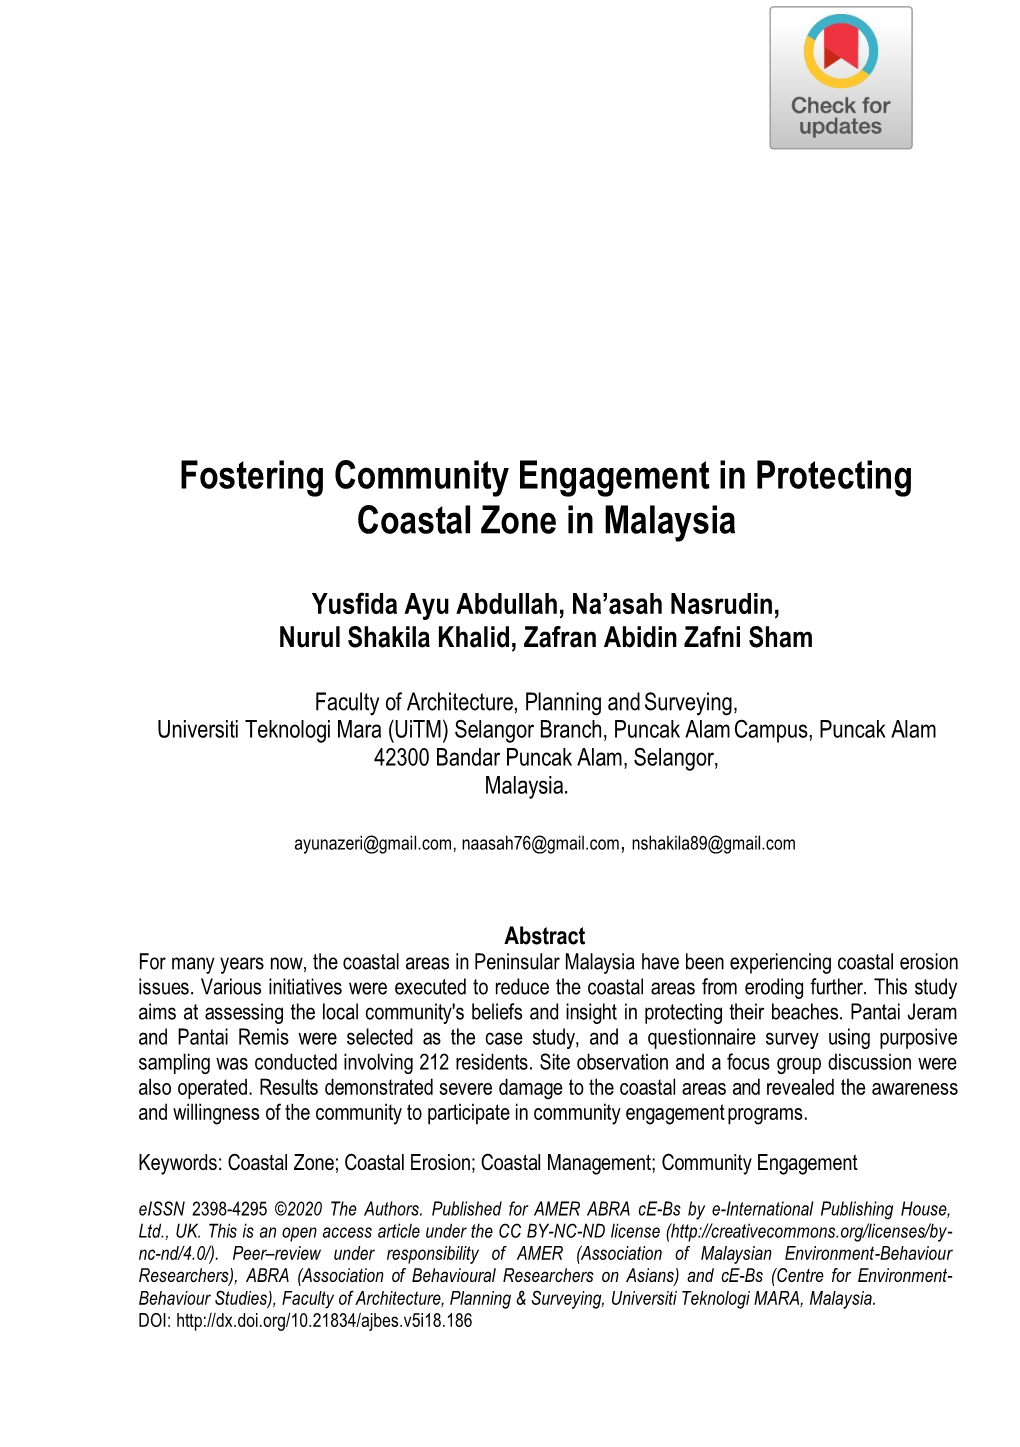 Fostering Community Engagement in Protecting Coastal Zone in Malaysia